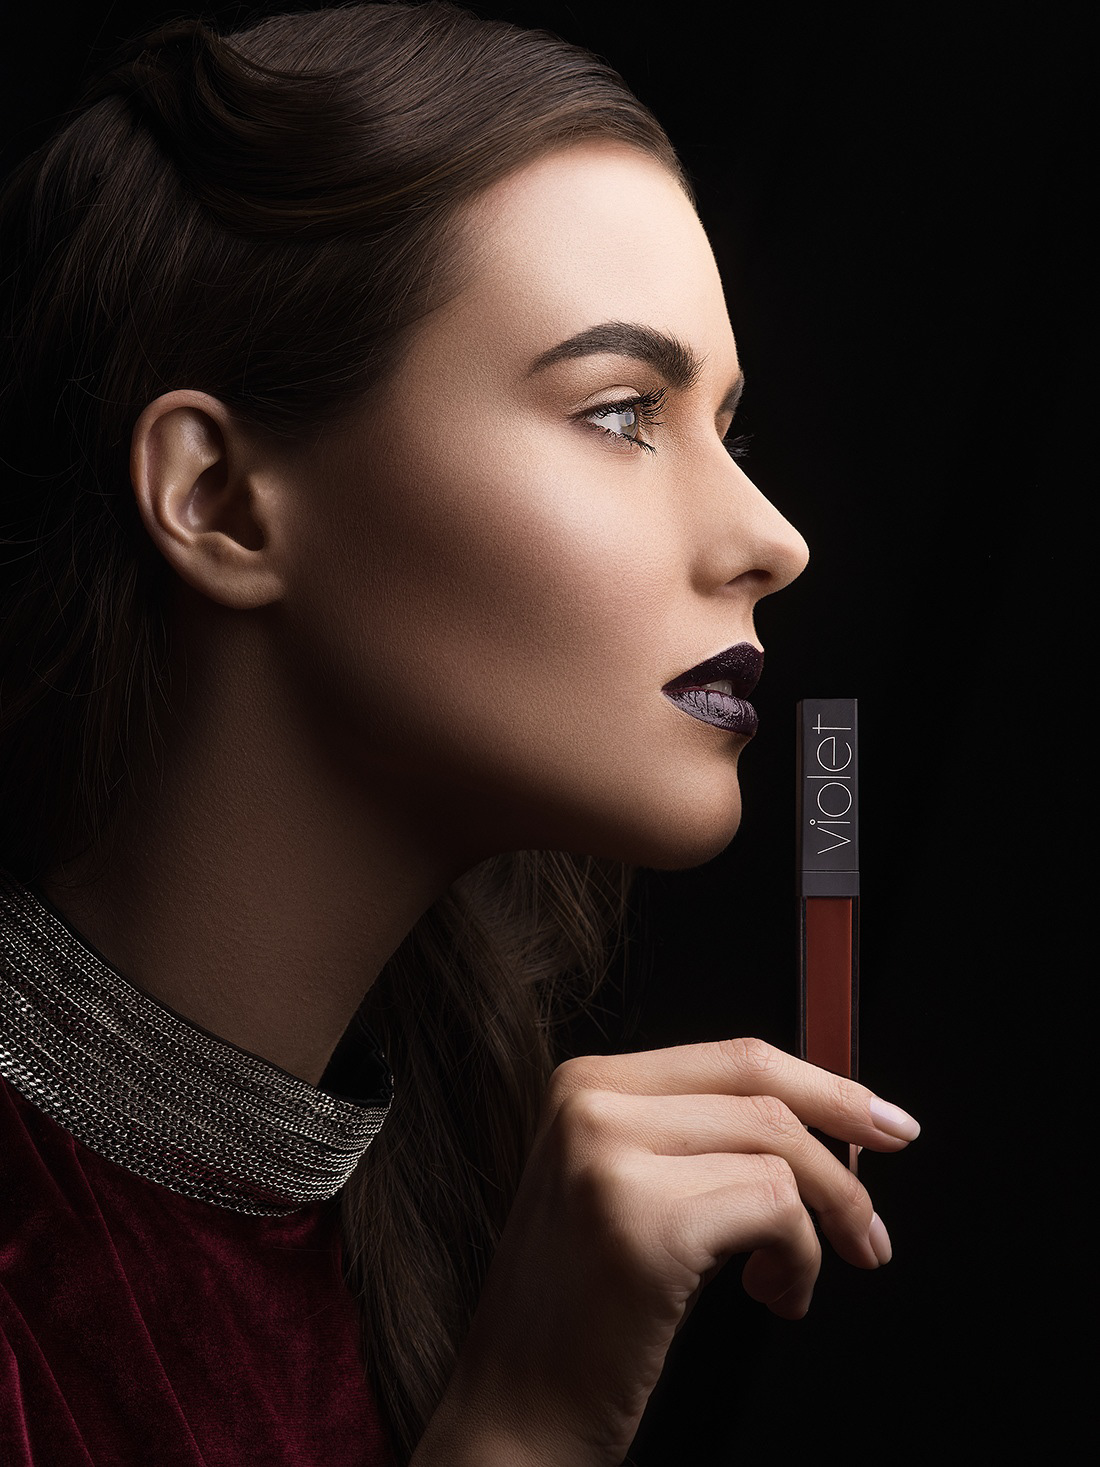 alex buts Advertising Campaign violet cosmetics cosmetics photographer photo commercial MUA nude retouch